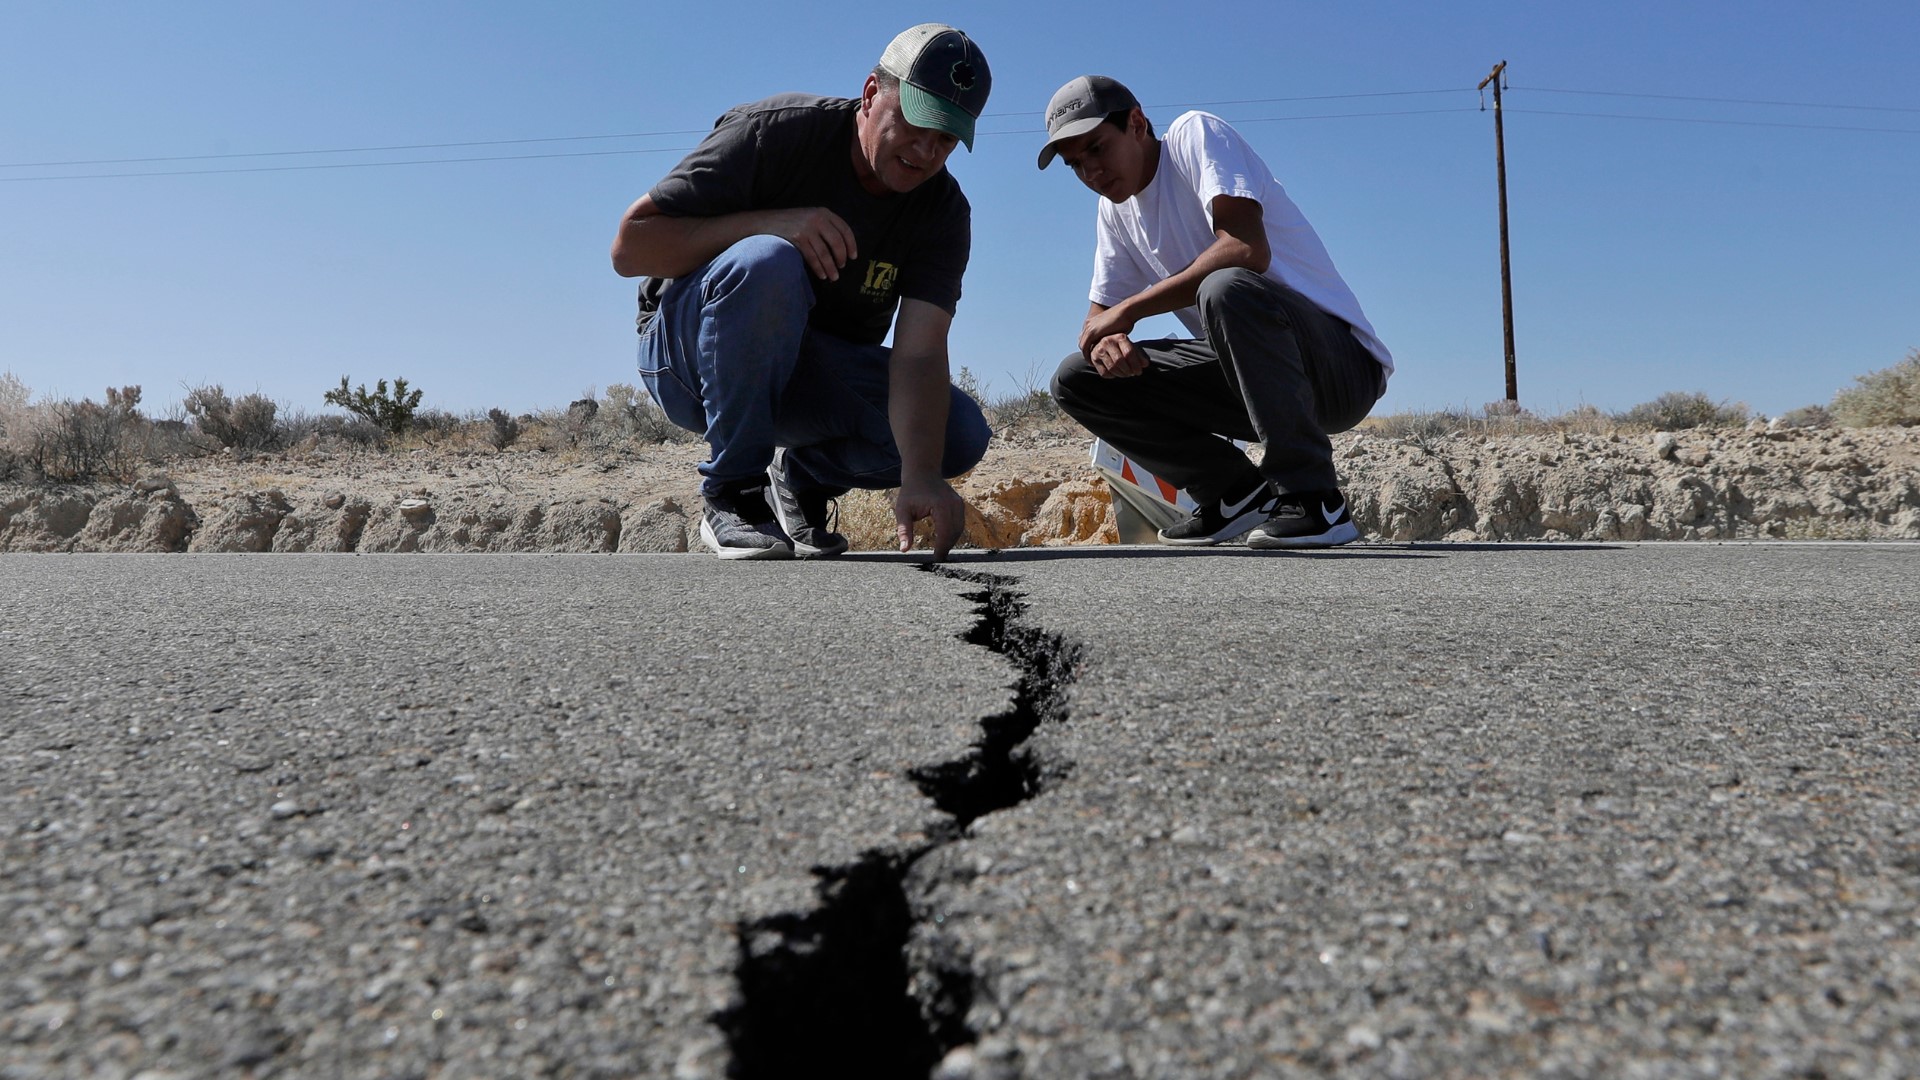 An expert with the Berkeley Seismology Lab explains earthquakes, and how one could affect Sacramento if it hit the Bay Area.